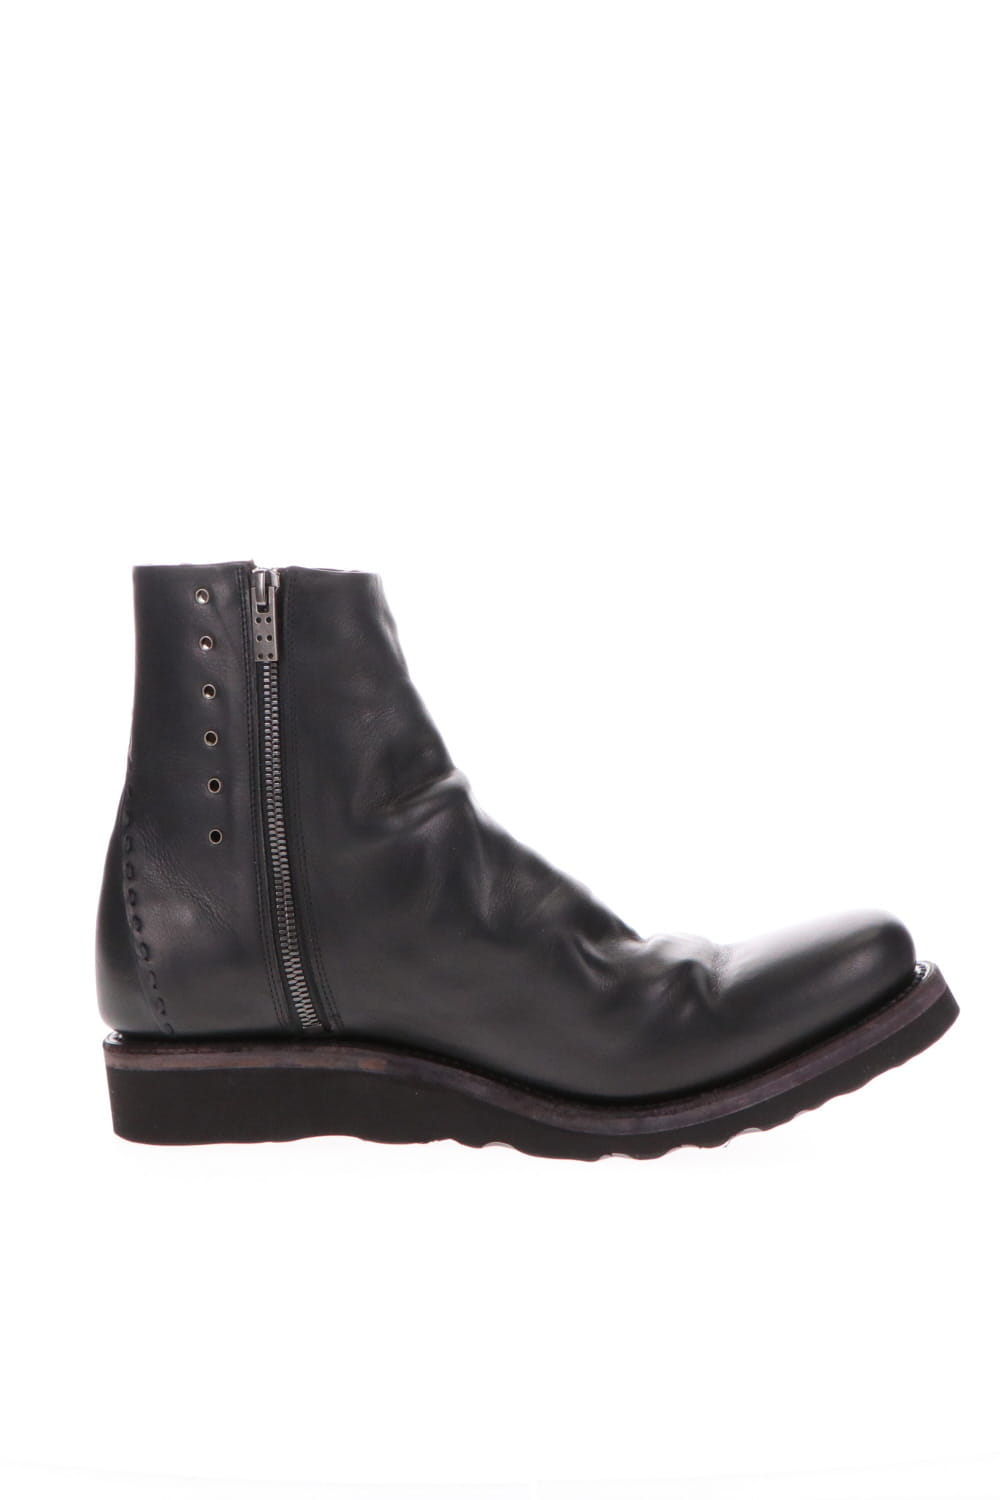 ankle-boots-calf-leather-black-1 | アンクルブーツ カーフ レザー ...